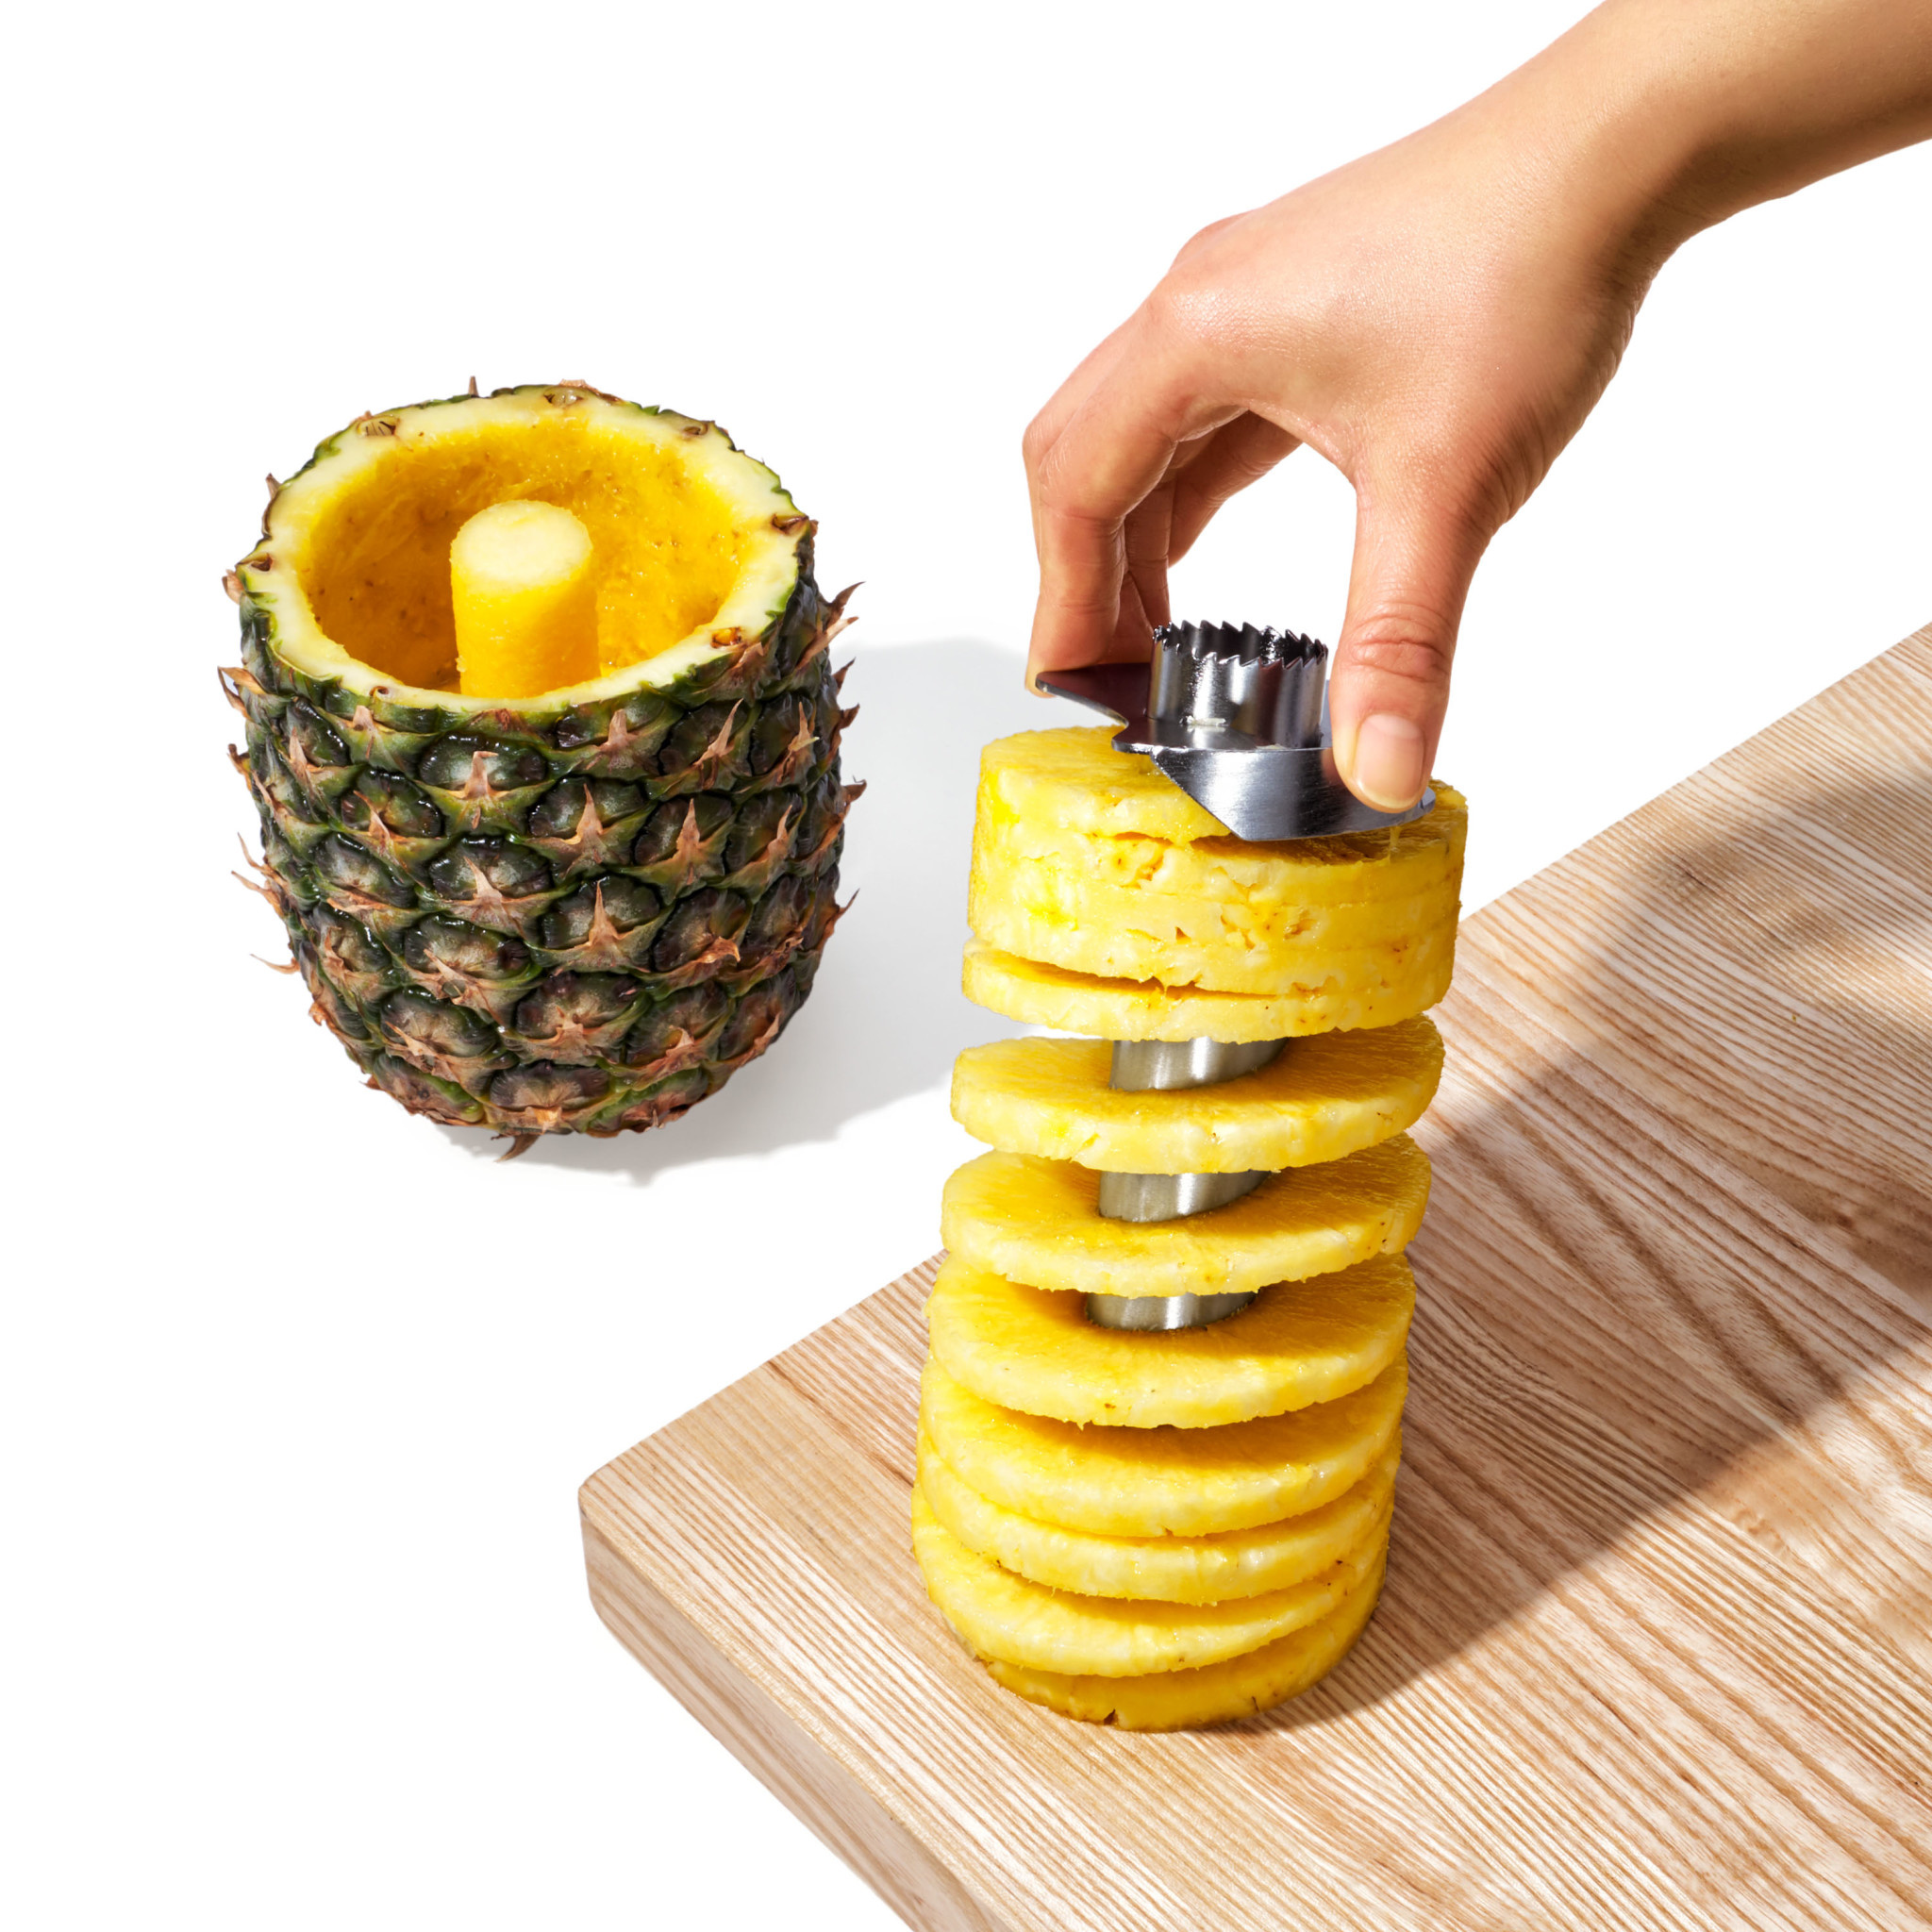 OXO Good Grips Stainless Steel Pineapple Slicer - Kitchen & Company